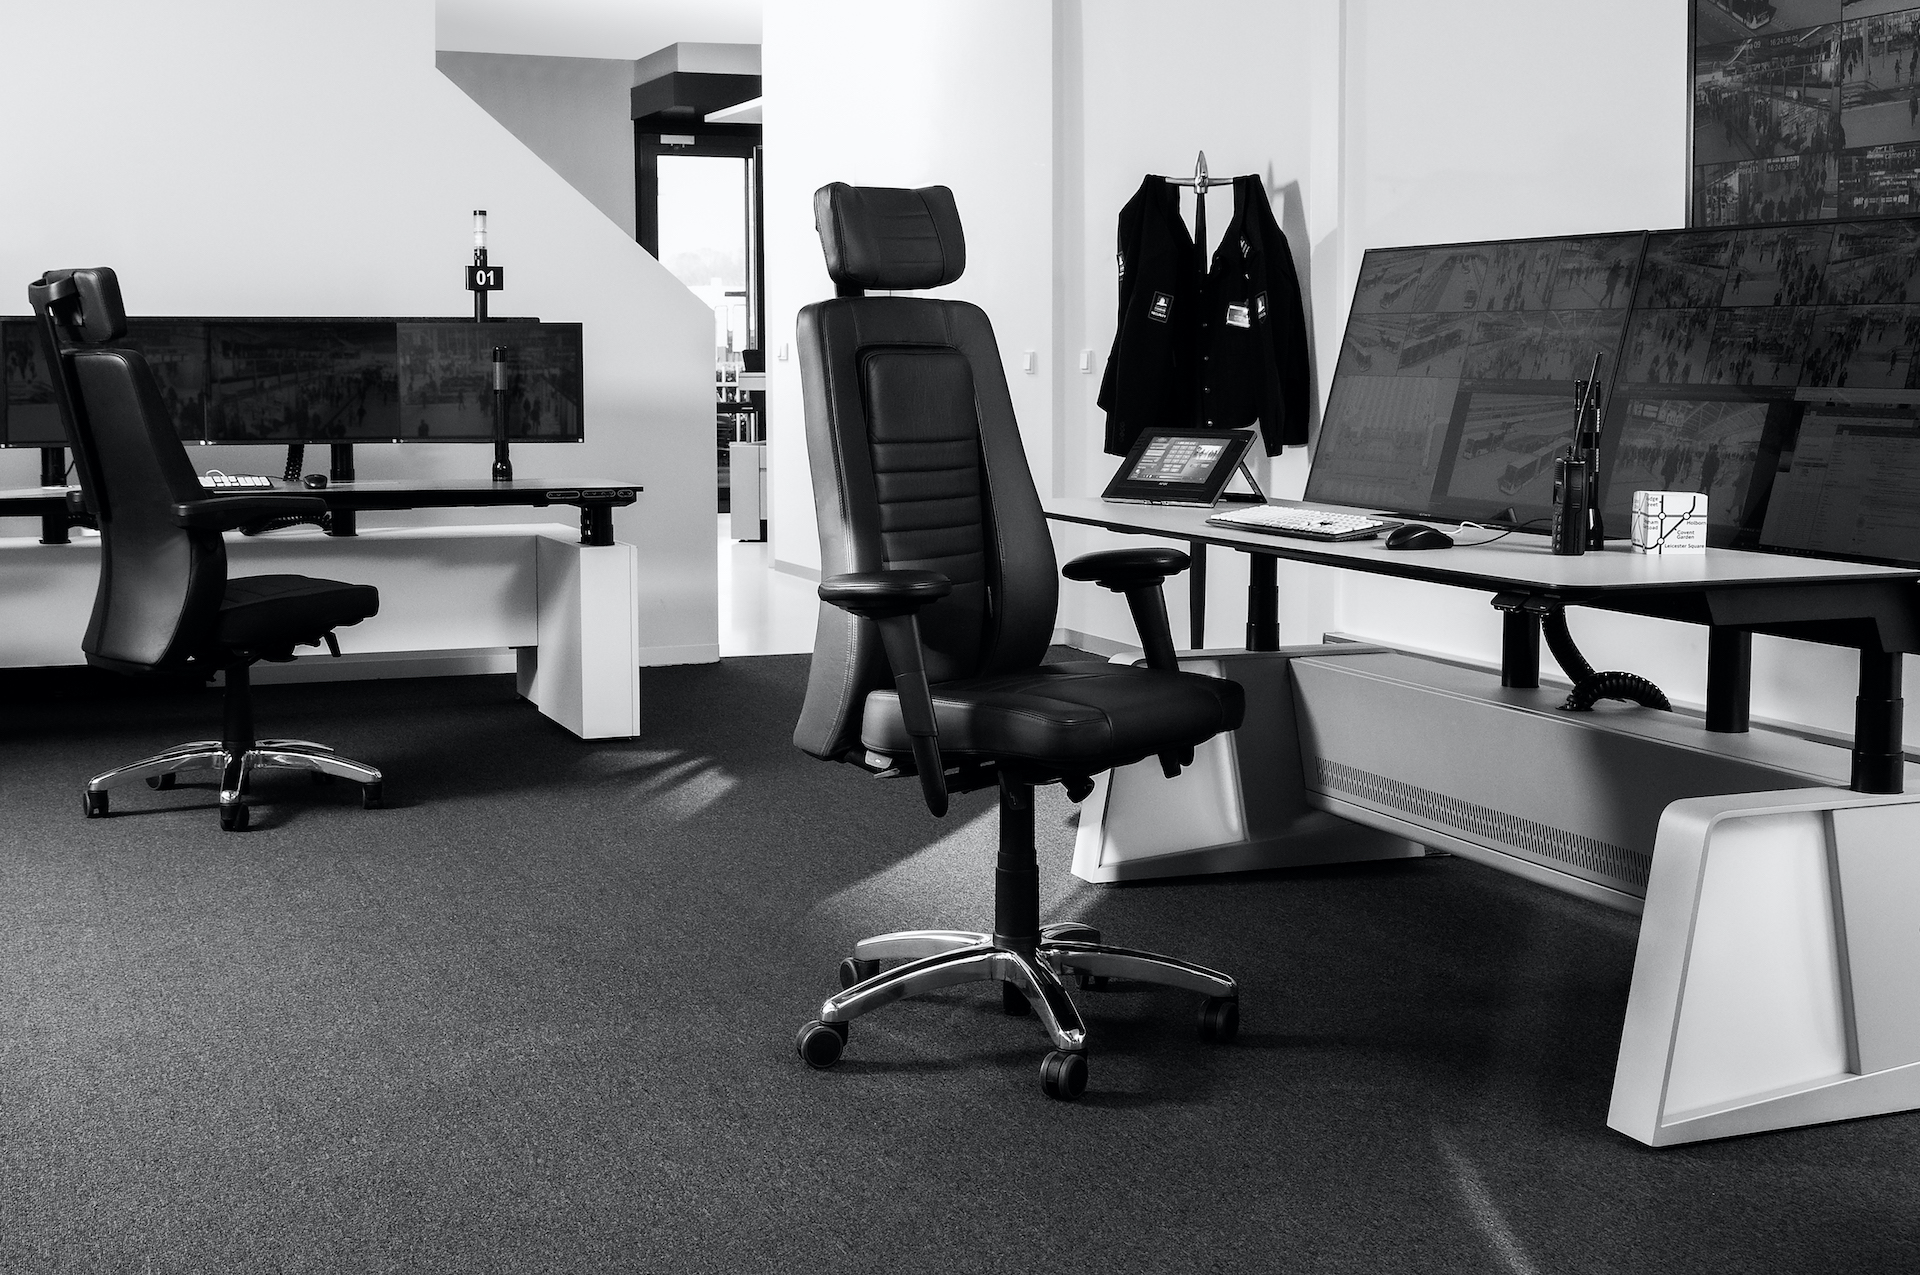 Two RH Focus 24/7 chairs in front of monitoring and surveillance work stations